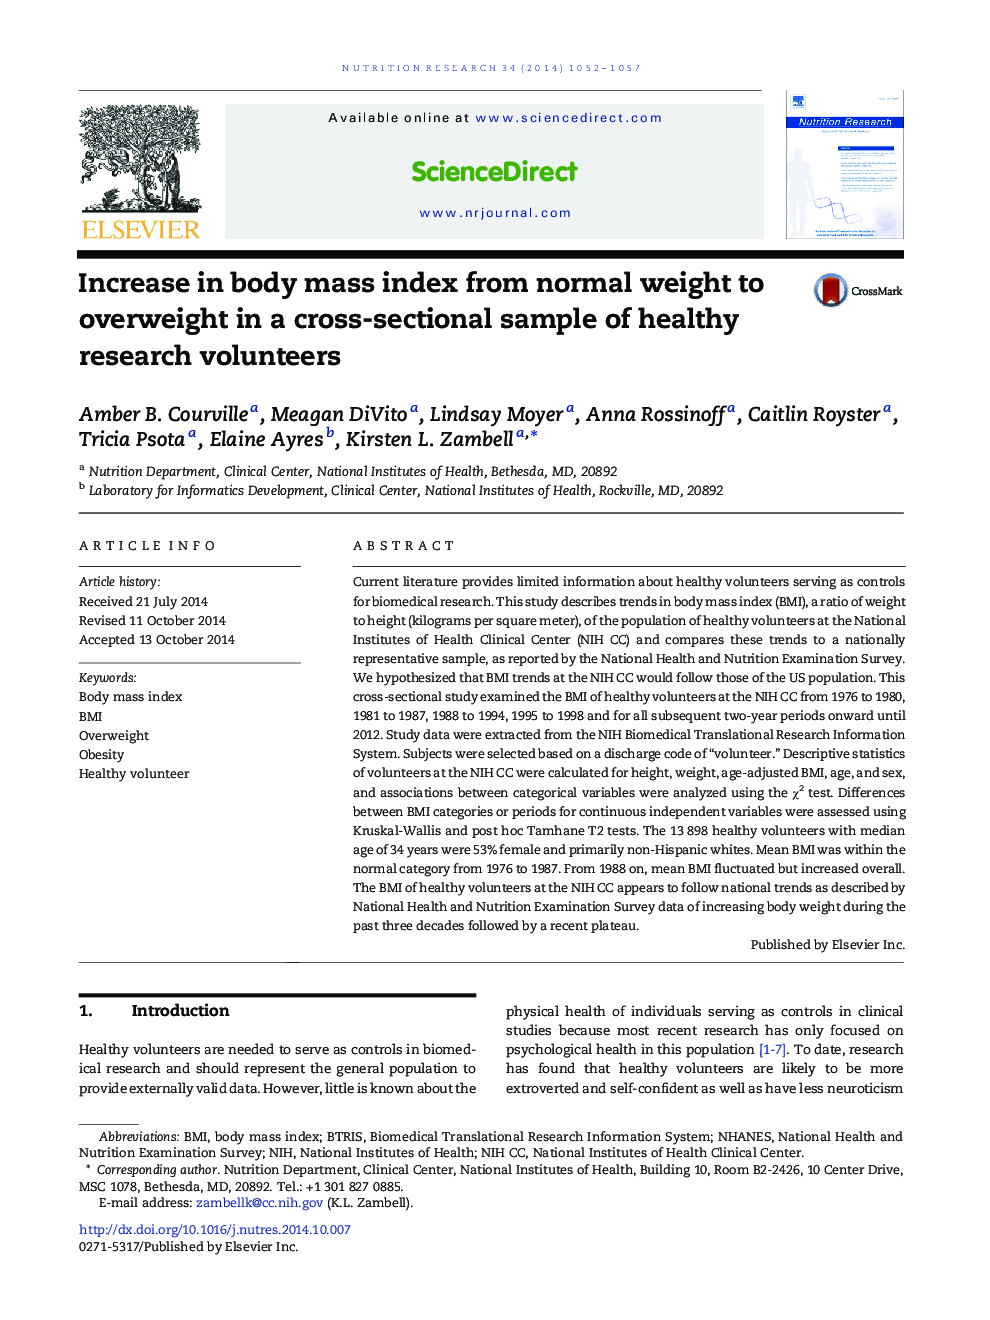 Increase in body mass index from normal weight to overweight in a cross-sectional sample of healthy research volunteers